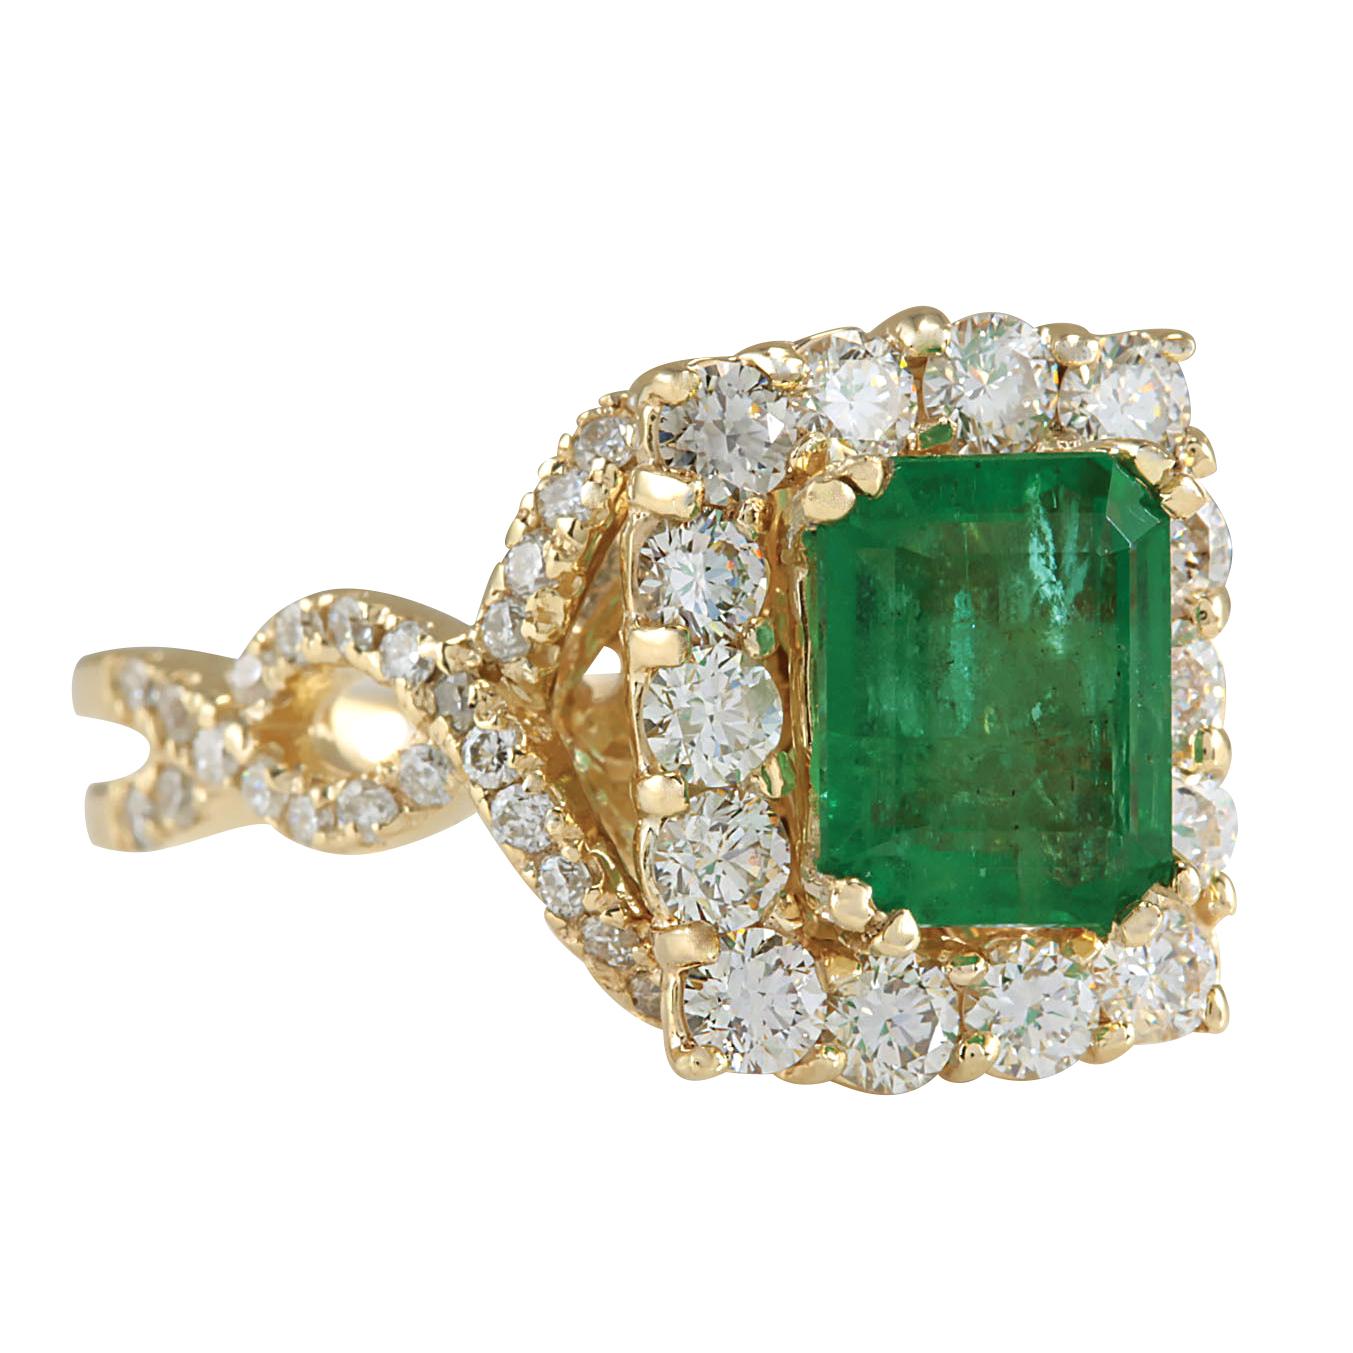 Stamped: 14K Yellow Gold
Total Ring Weight: 6.8 Grams
Total Natural Emerald Weight is 1.88 Carat (Measures: 8.00x6.00 mm)
Color: Green
Total Natural Diamond Weight is 1.30 Carat
Color: F-G, Clarity: VS2-SI1
Face Measures: 13.40x11.05 mm
Sku: